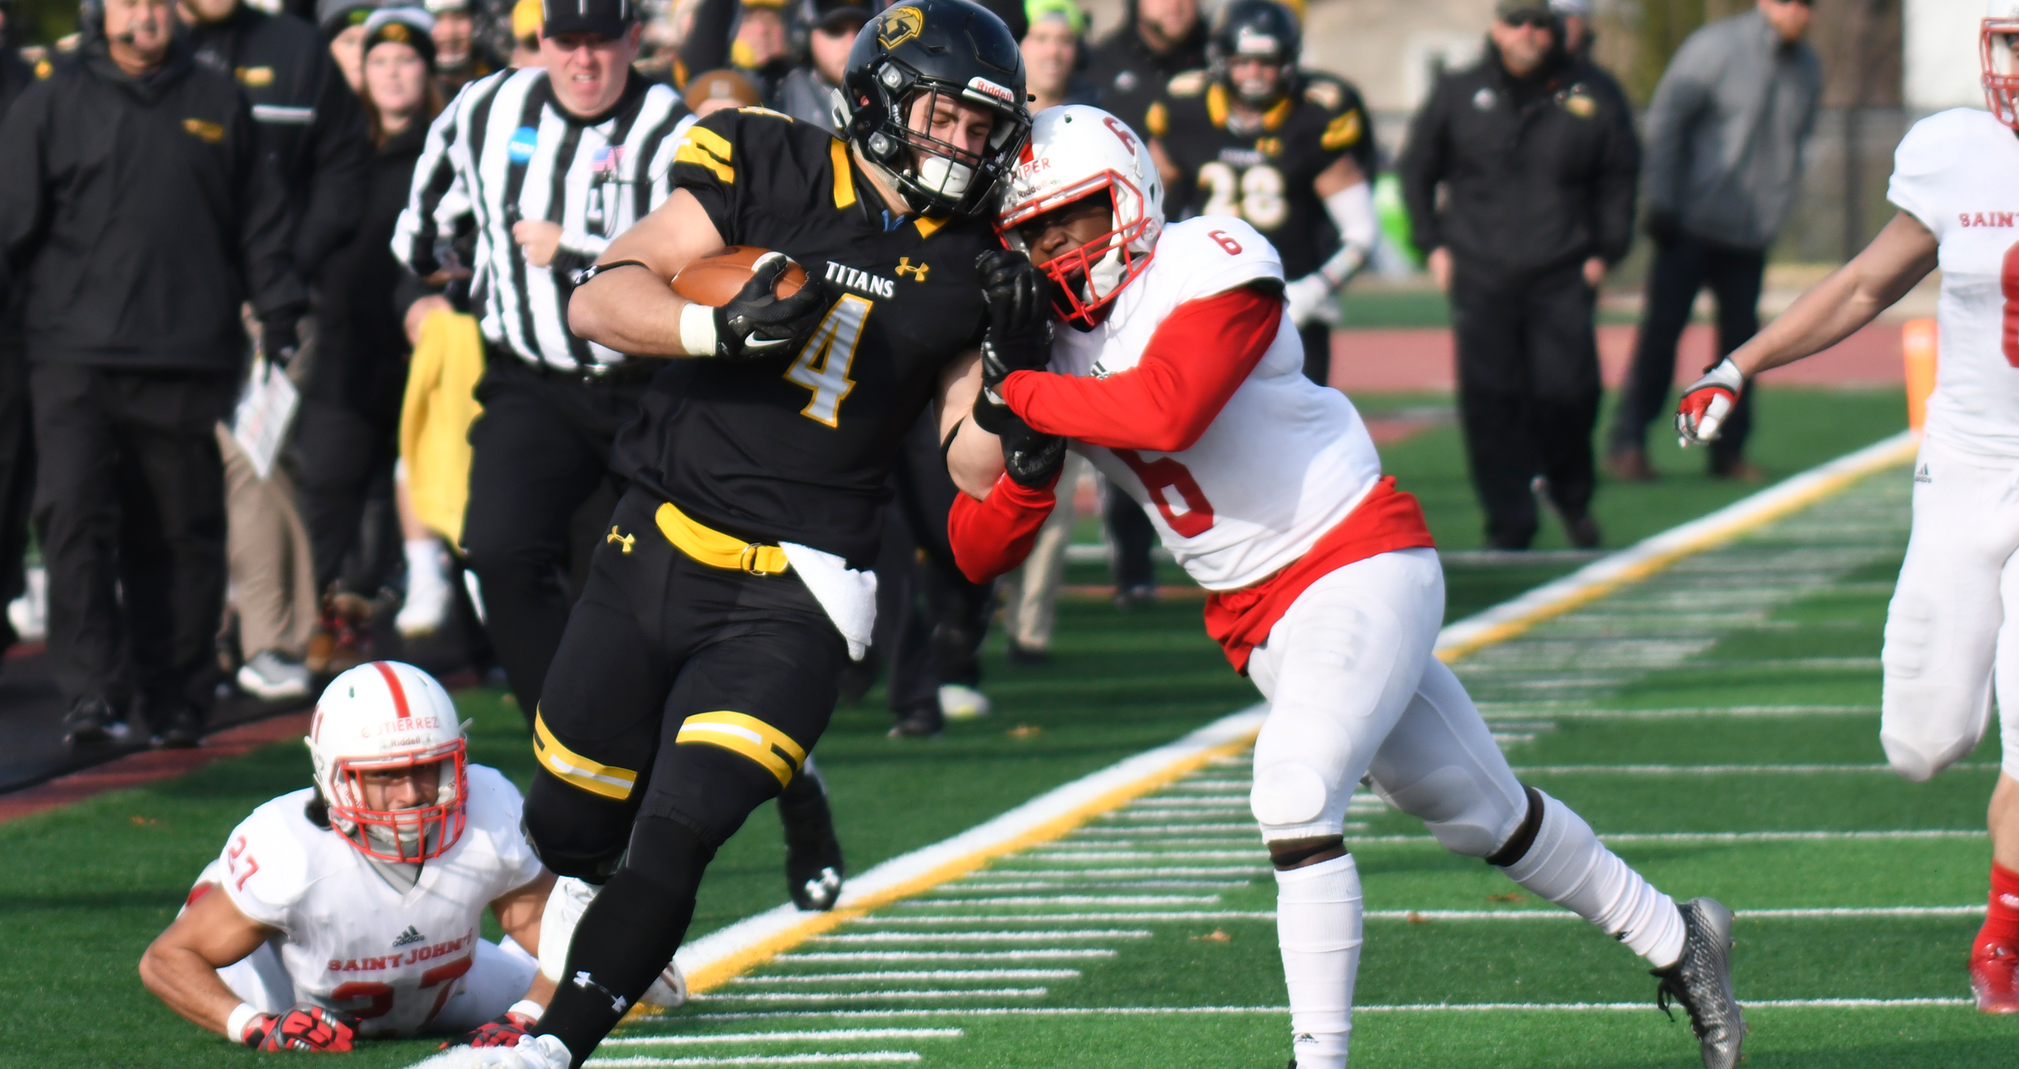 Dylan Hecker rushed for a career-high 198 yards and three touchdowns against the Johnnies.